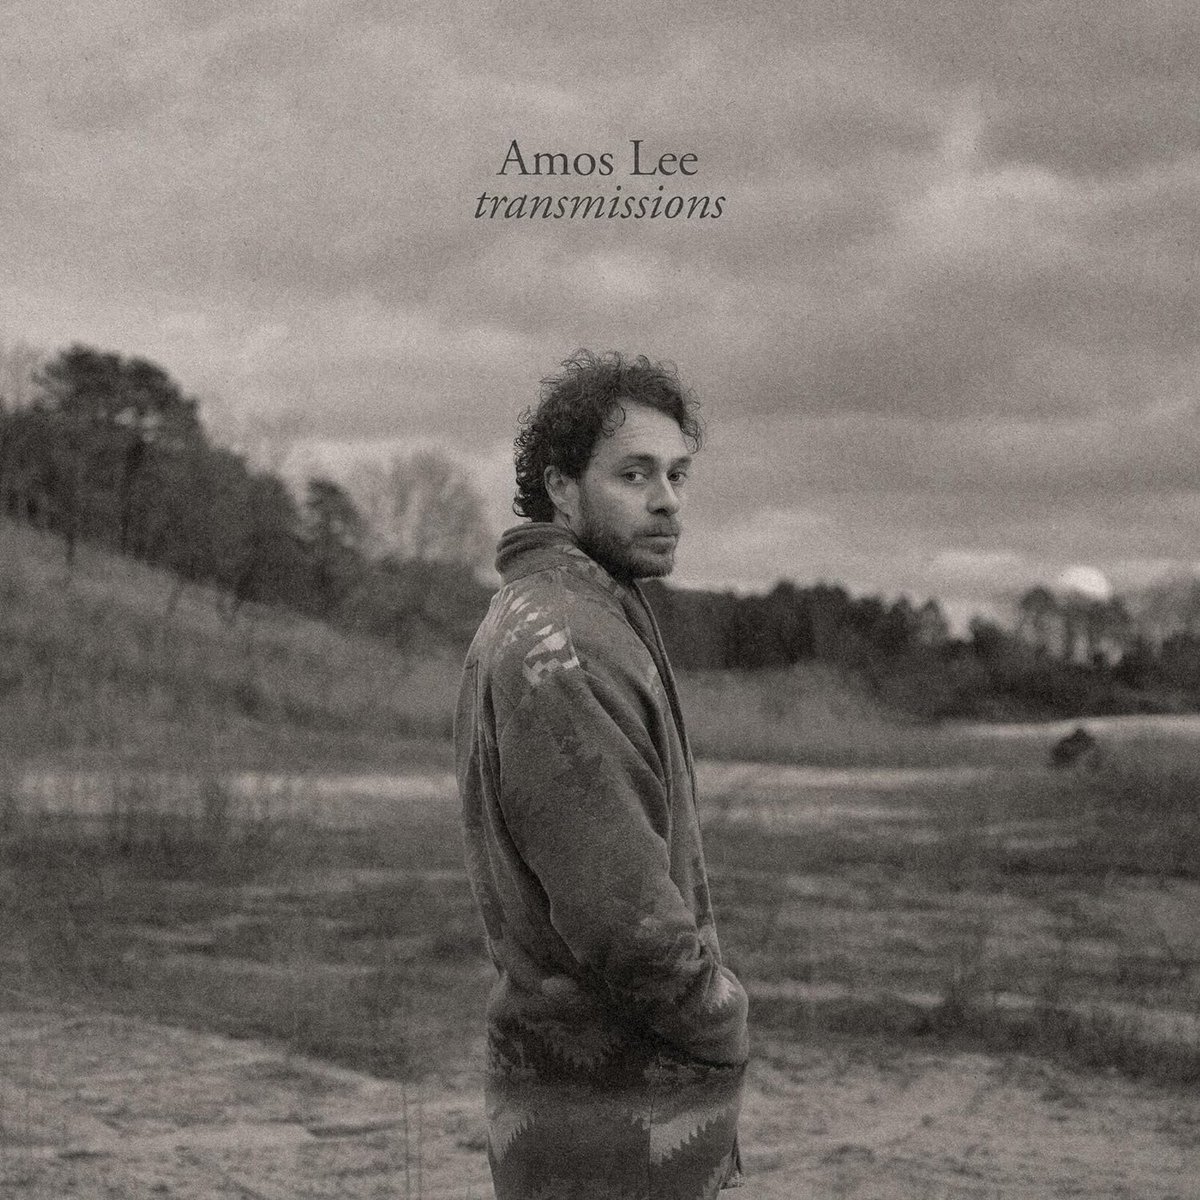 #AmosLee - Transmissions $29.98 [Pre-order] amzn.to/3UkYj1e